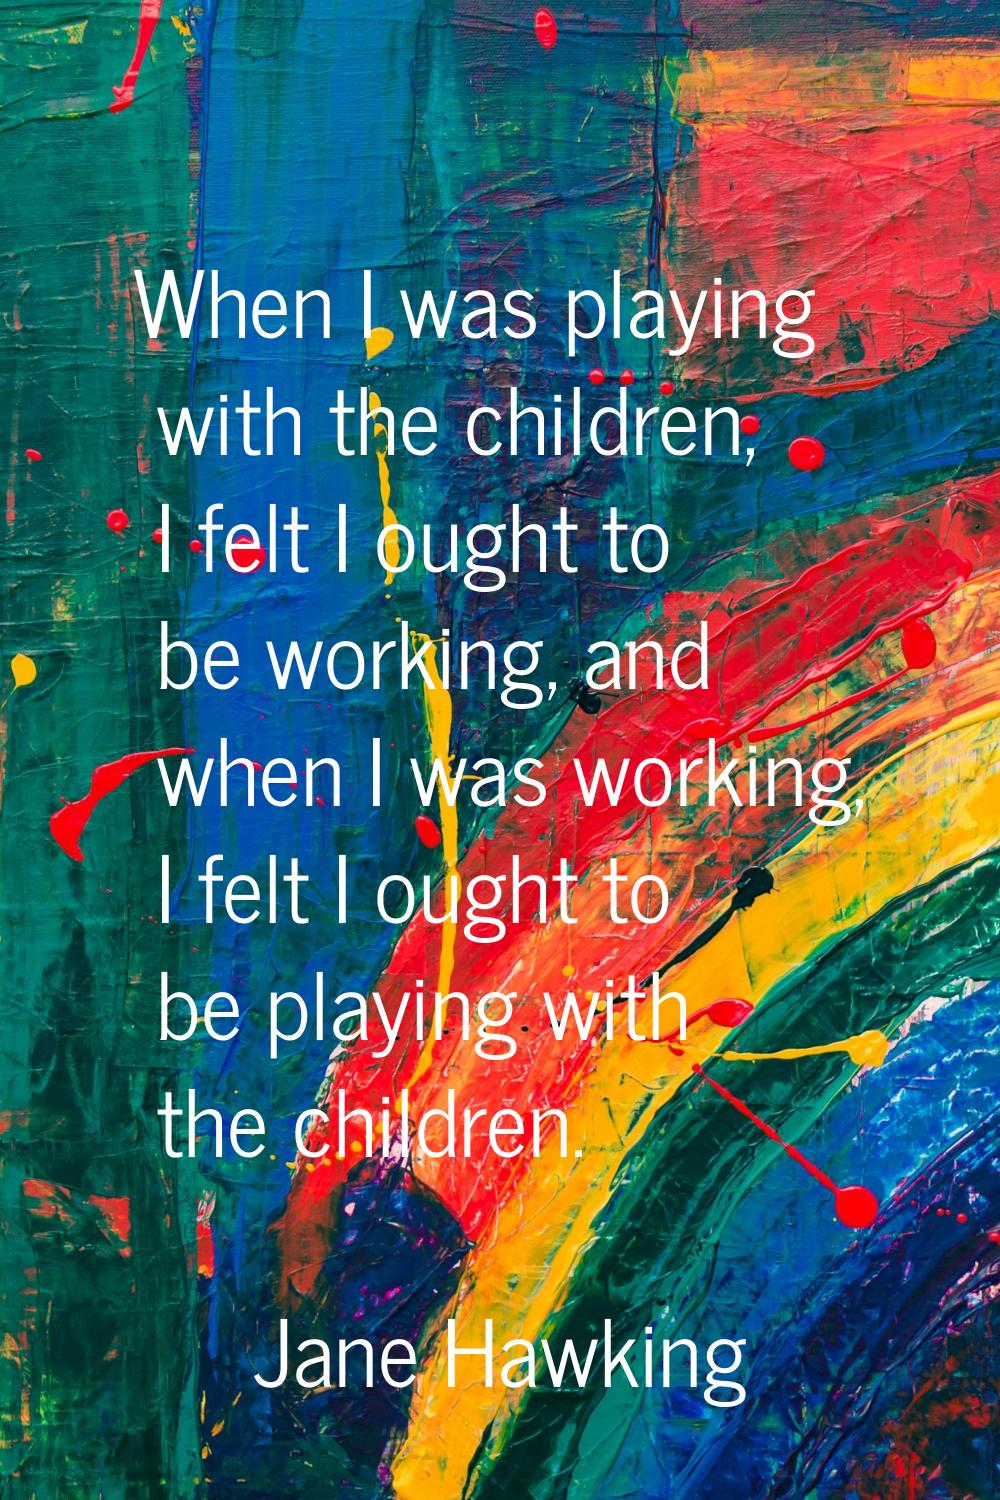 When I was playing with the children, I felt I ought to be working, and when I was working, I felt 